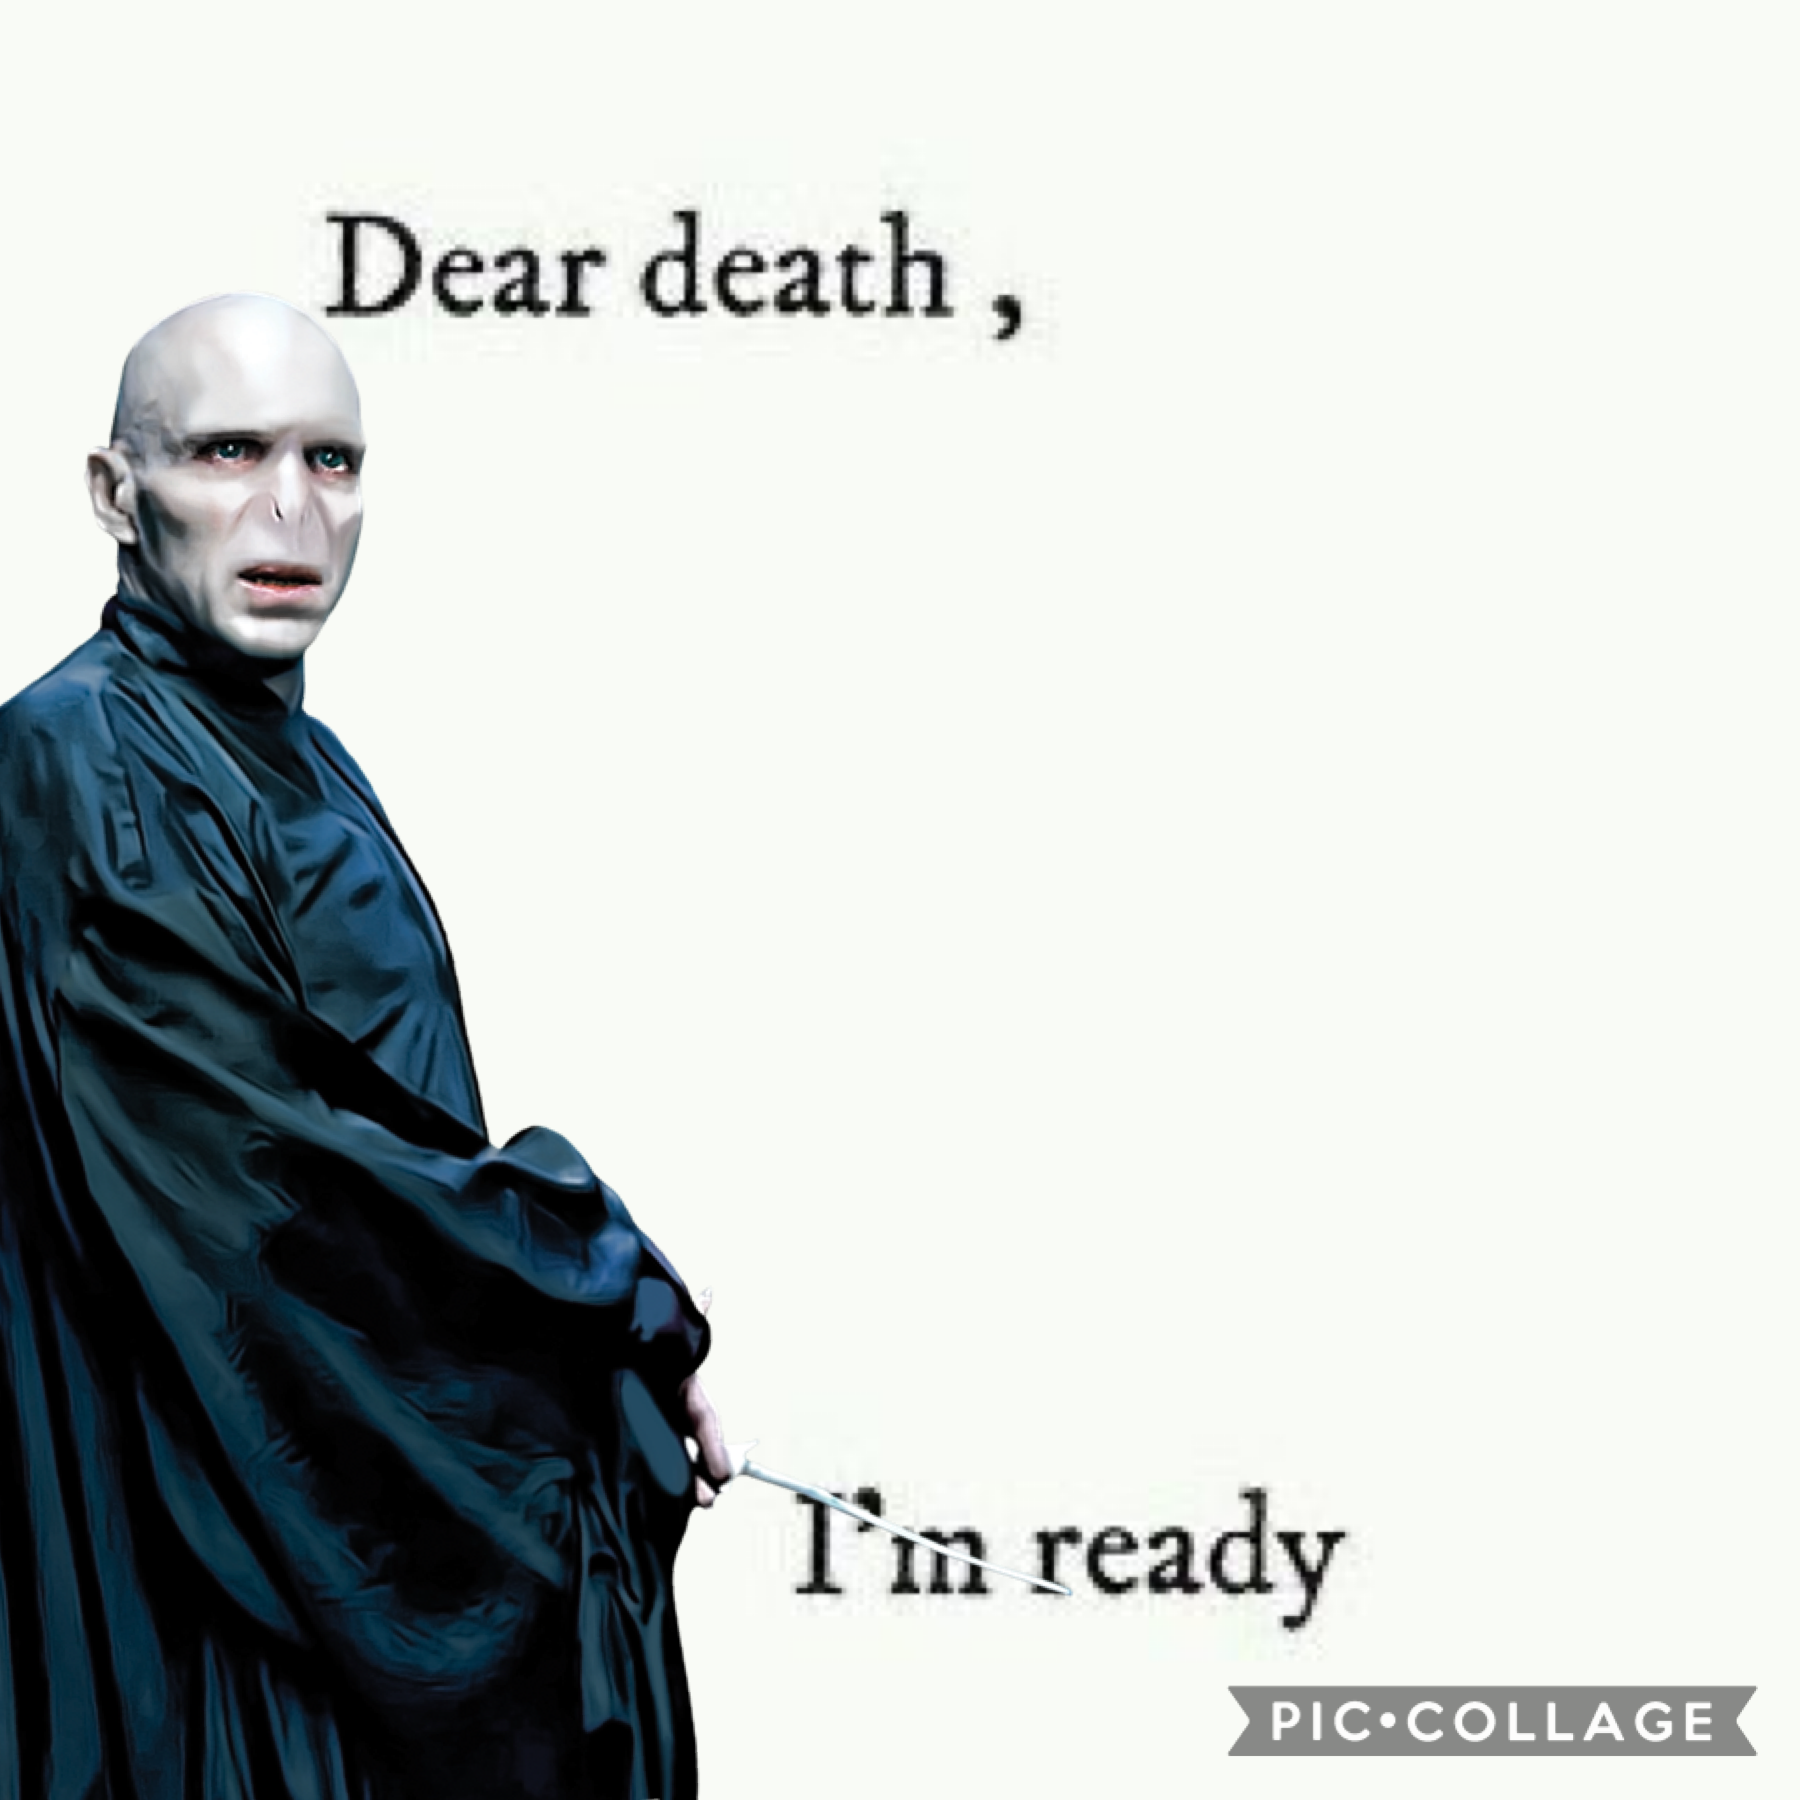 Lord Voldemort 
I hope I spelled that right lol😂😂